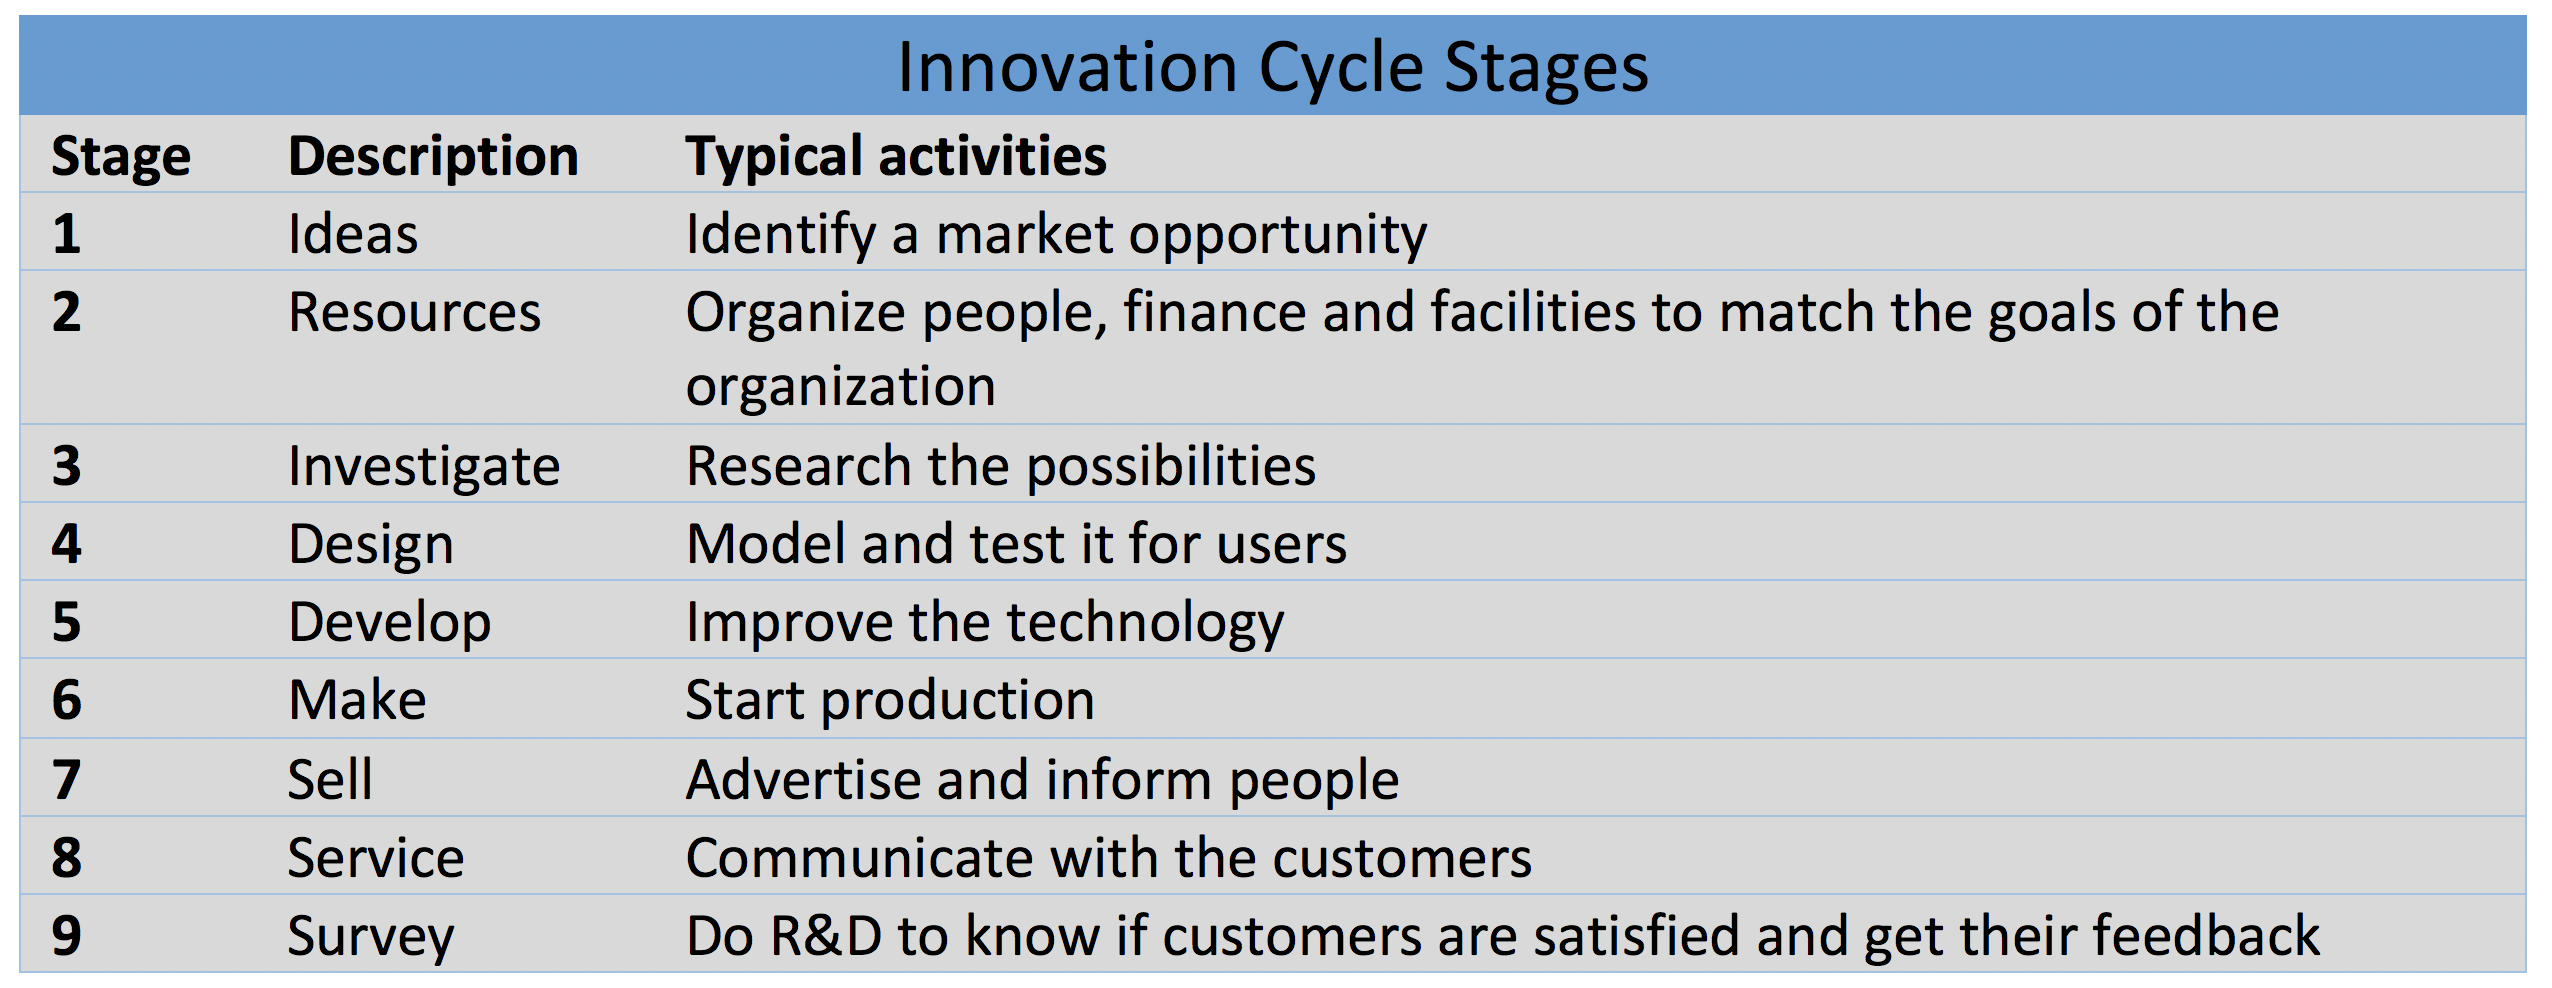 Innovation Cycle Stages